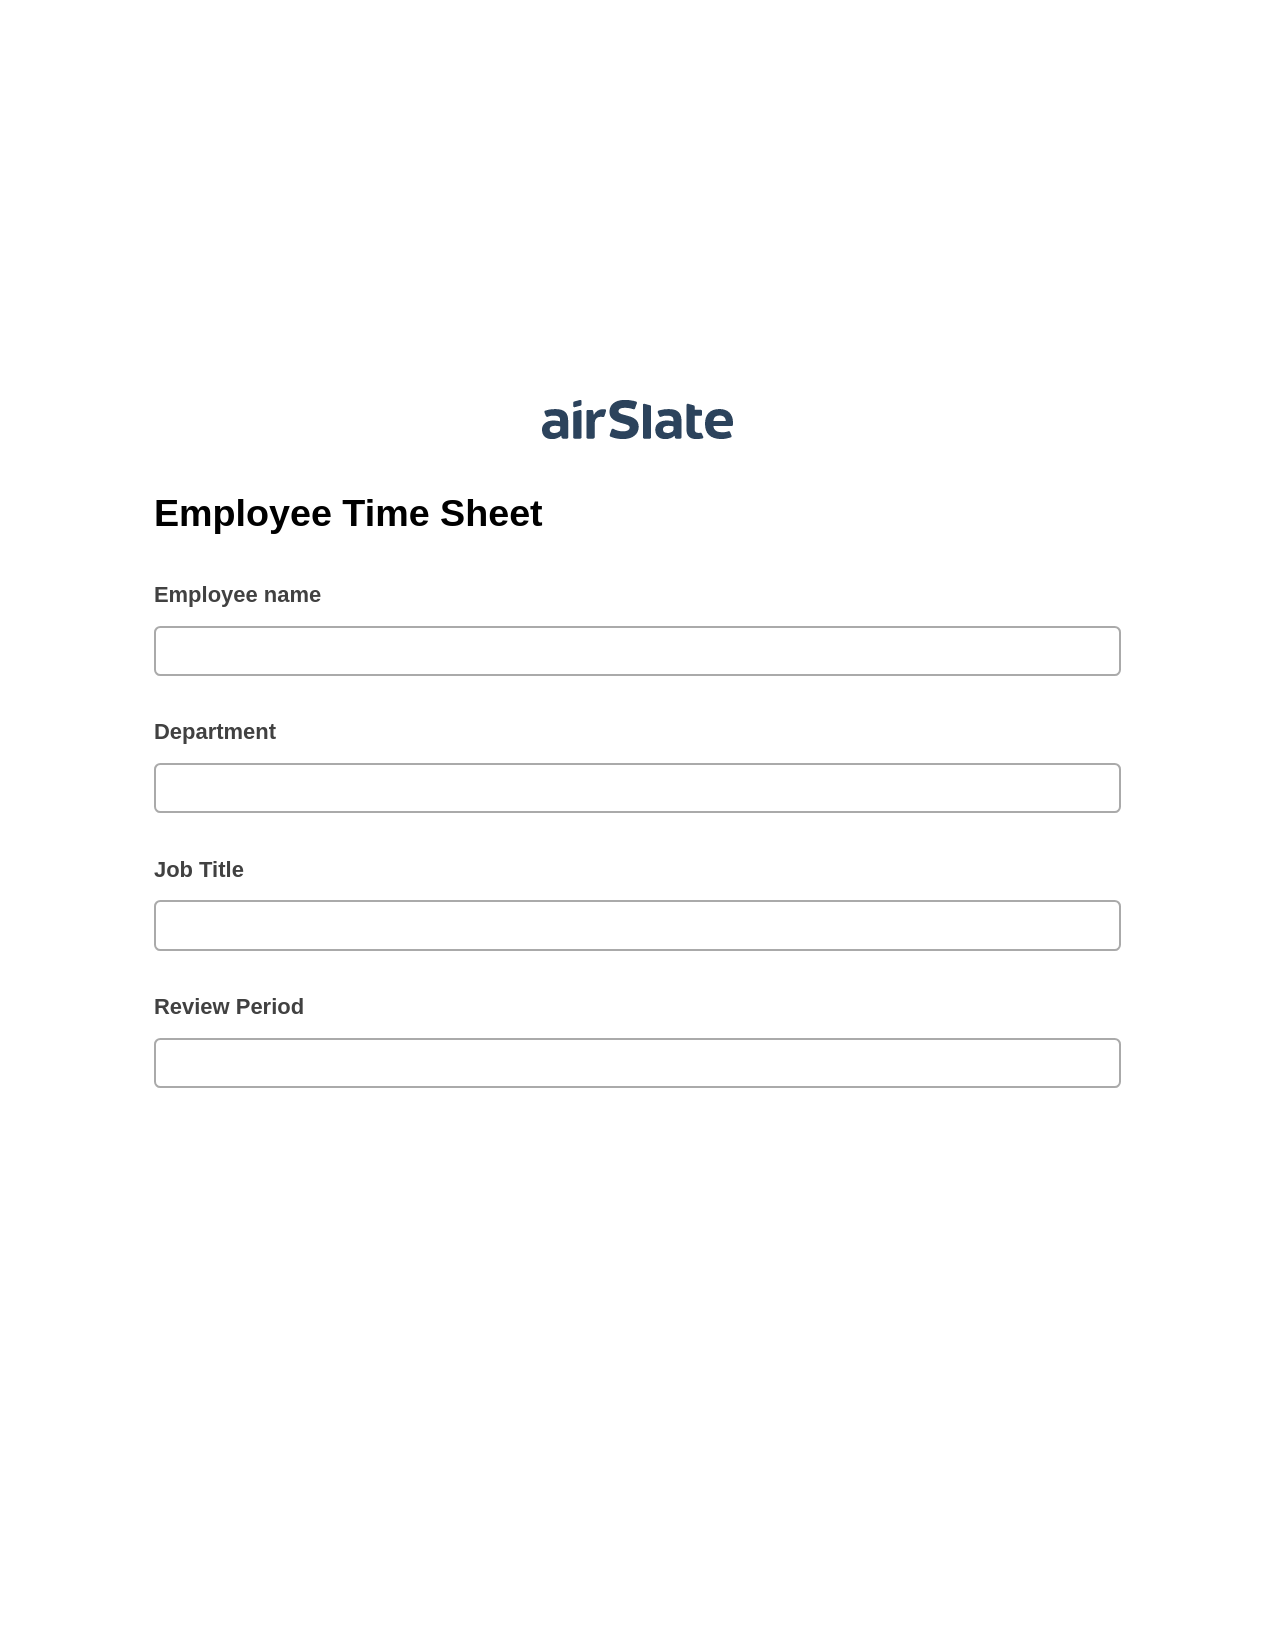 Multirole Employee Time Sheet Pre-fill from MS Dynamics 365 Records, Remove Tags From Slate Bot, Export to Excel 365 Bot